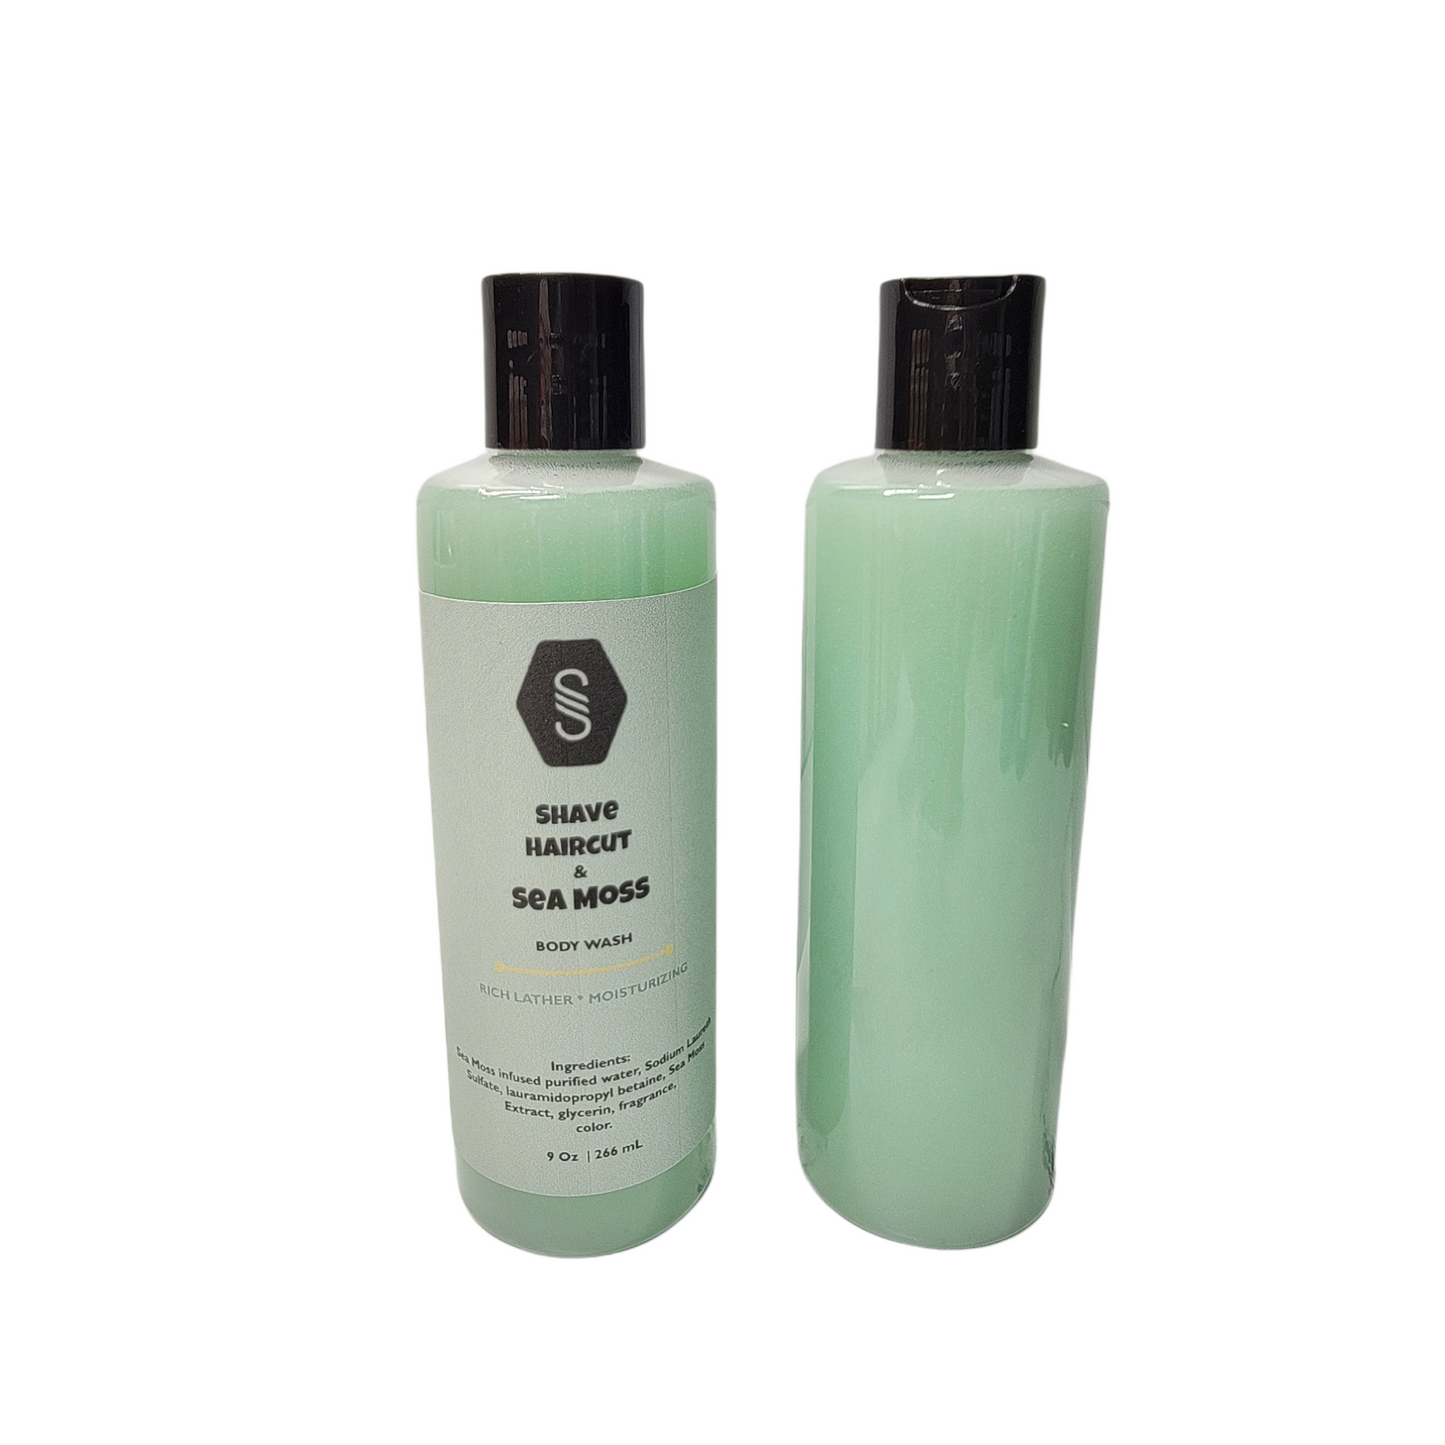 Strebors Shave & Haircut and Seamoss Body Wash for men